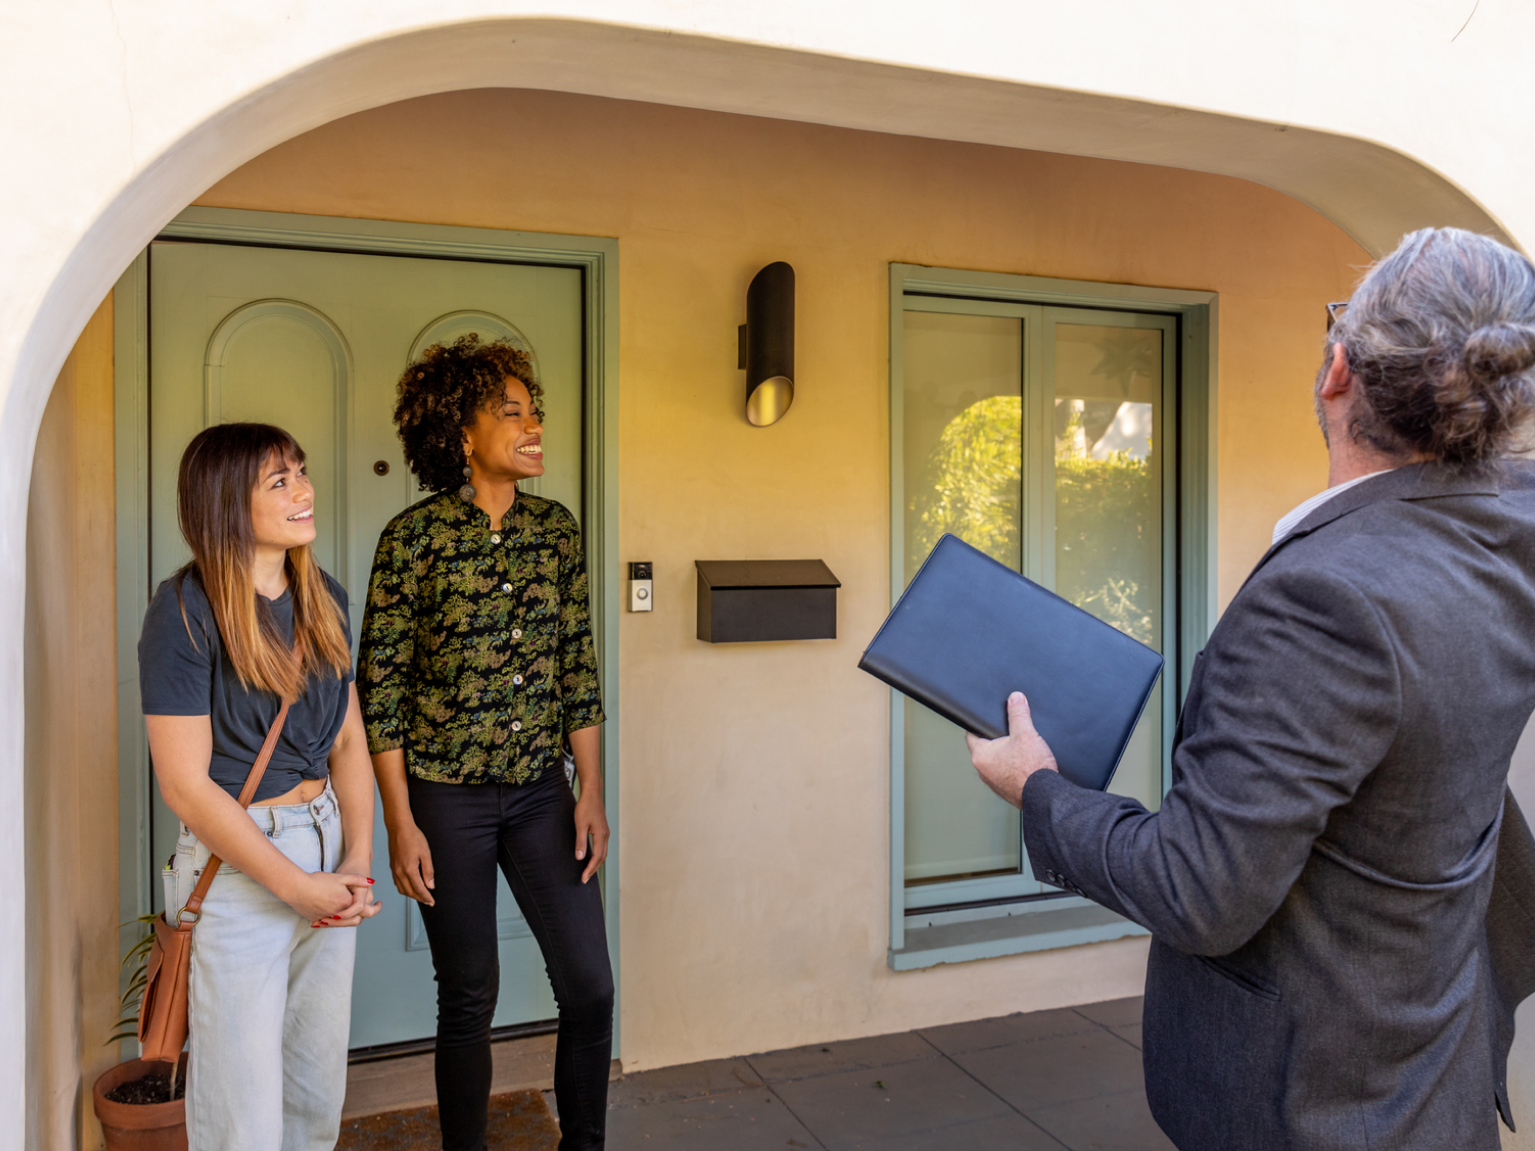 Image of renters meeting with a property manager to rent a single family home